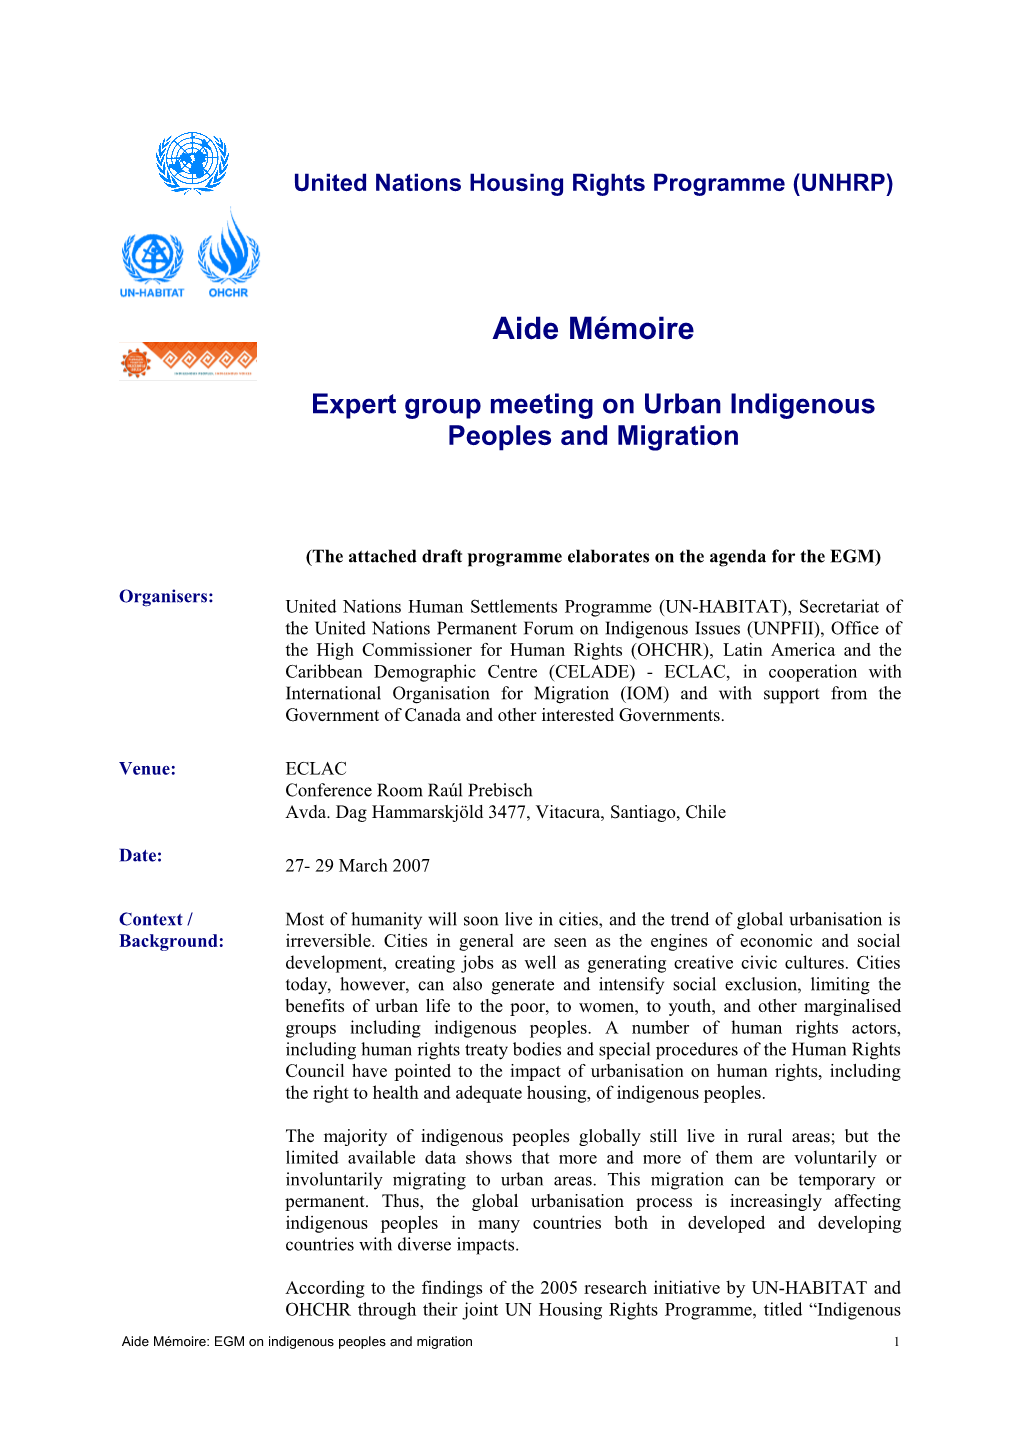 To Assess Impacts of the Migration Process on Indigenous Peoples;